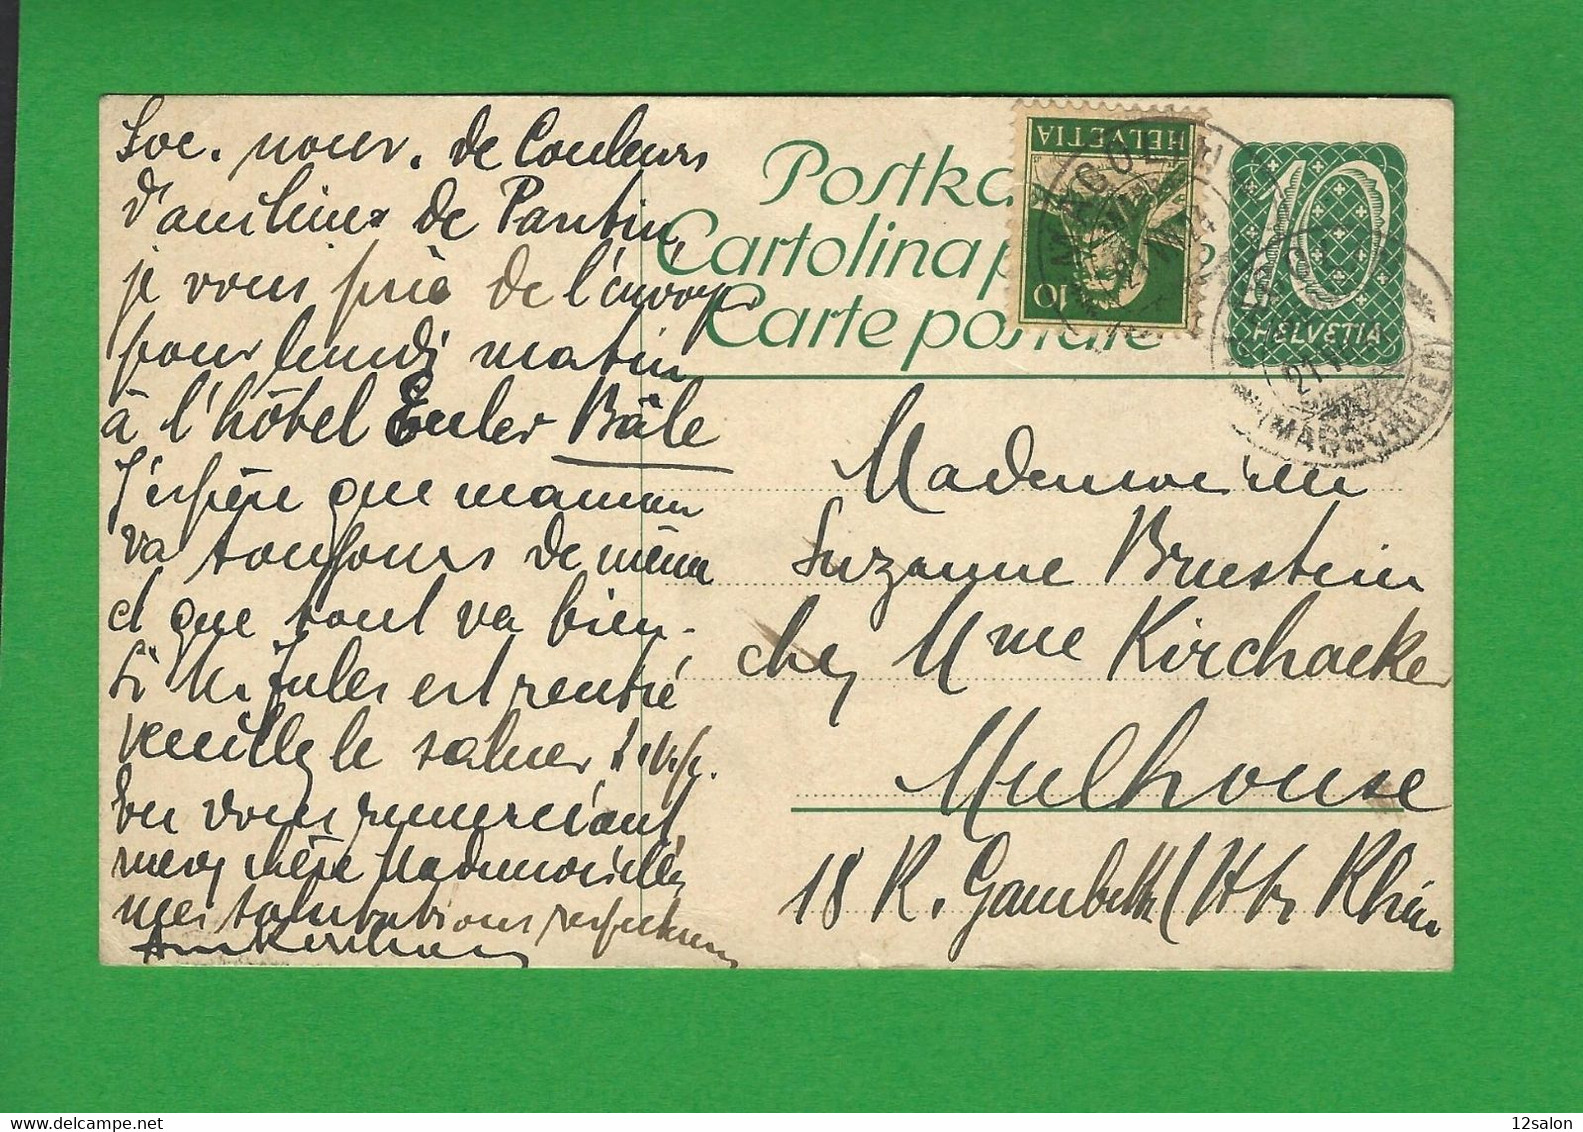 ENTIERS POSTAUX SUISSE Obl MACOLIN - Stamped Stationery